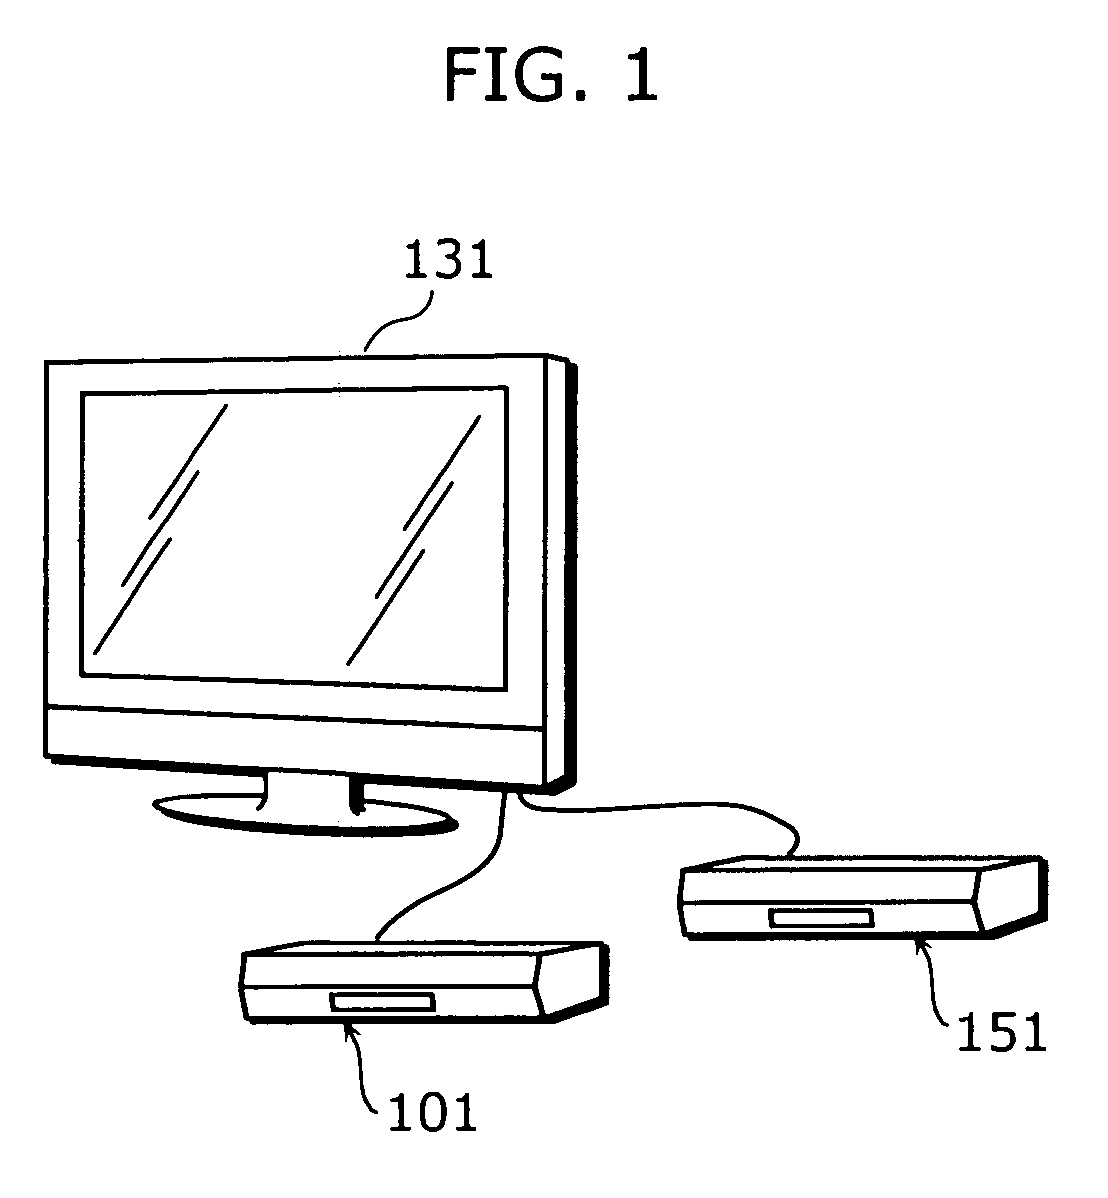 Reproduction apparatus and system